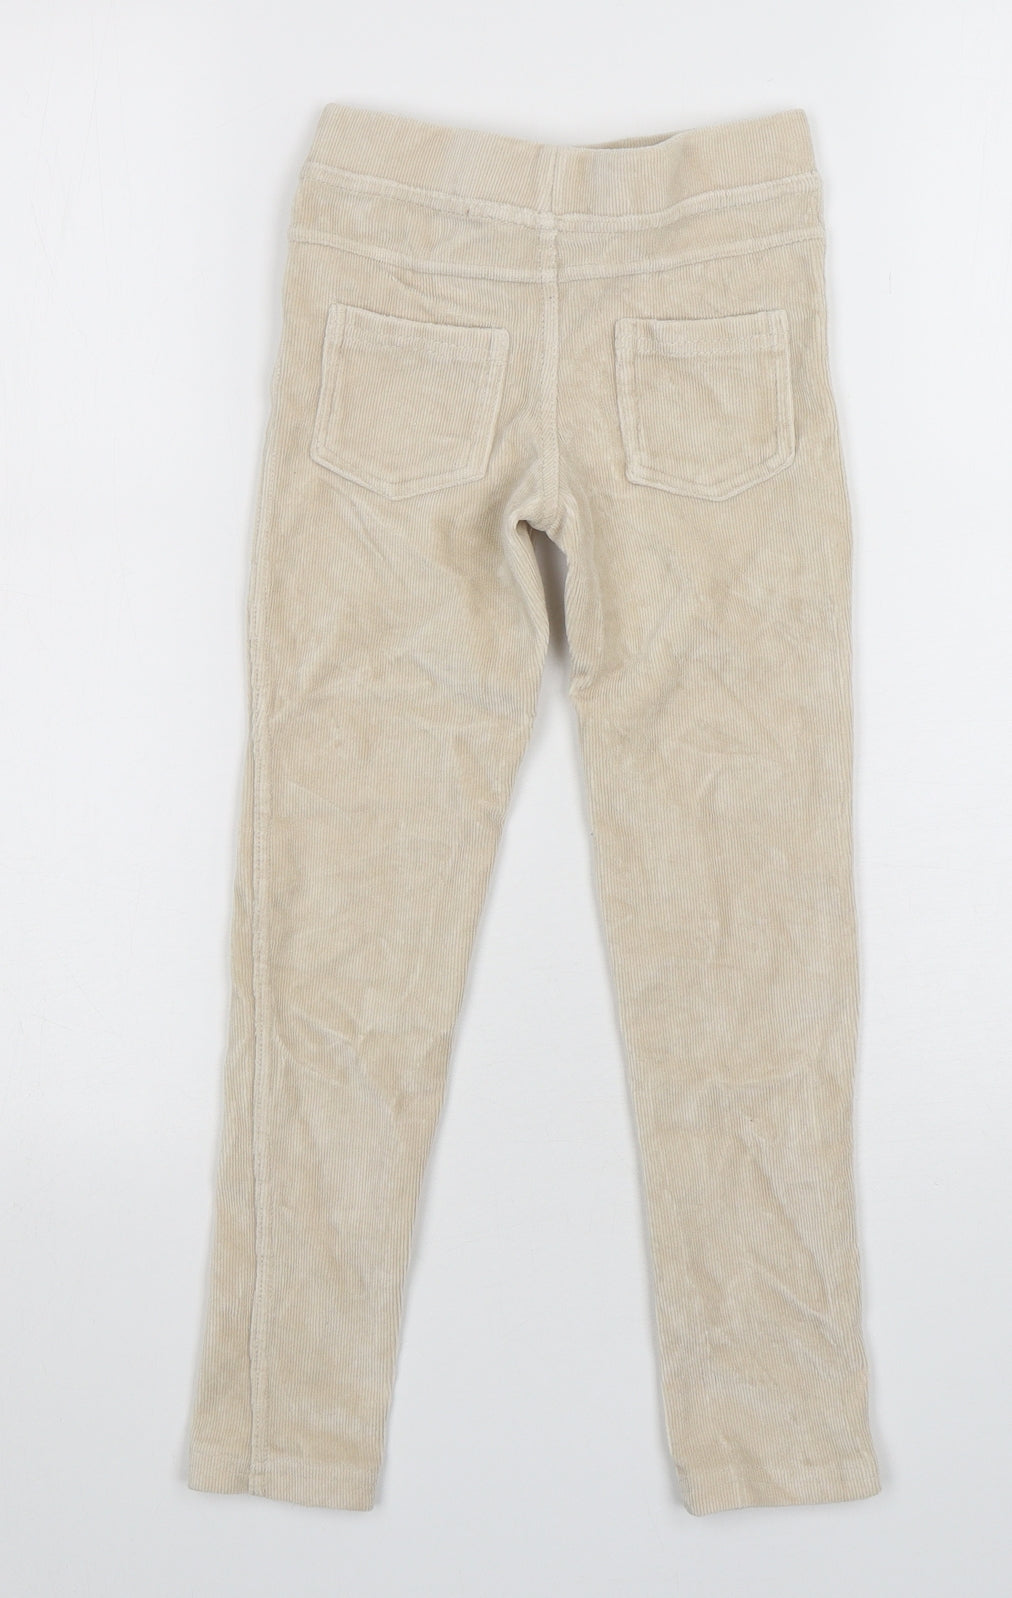 Young Dimension Girls Beige  Polyester Sweatpants Trousers Size 7-8 Years  Regular